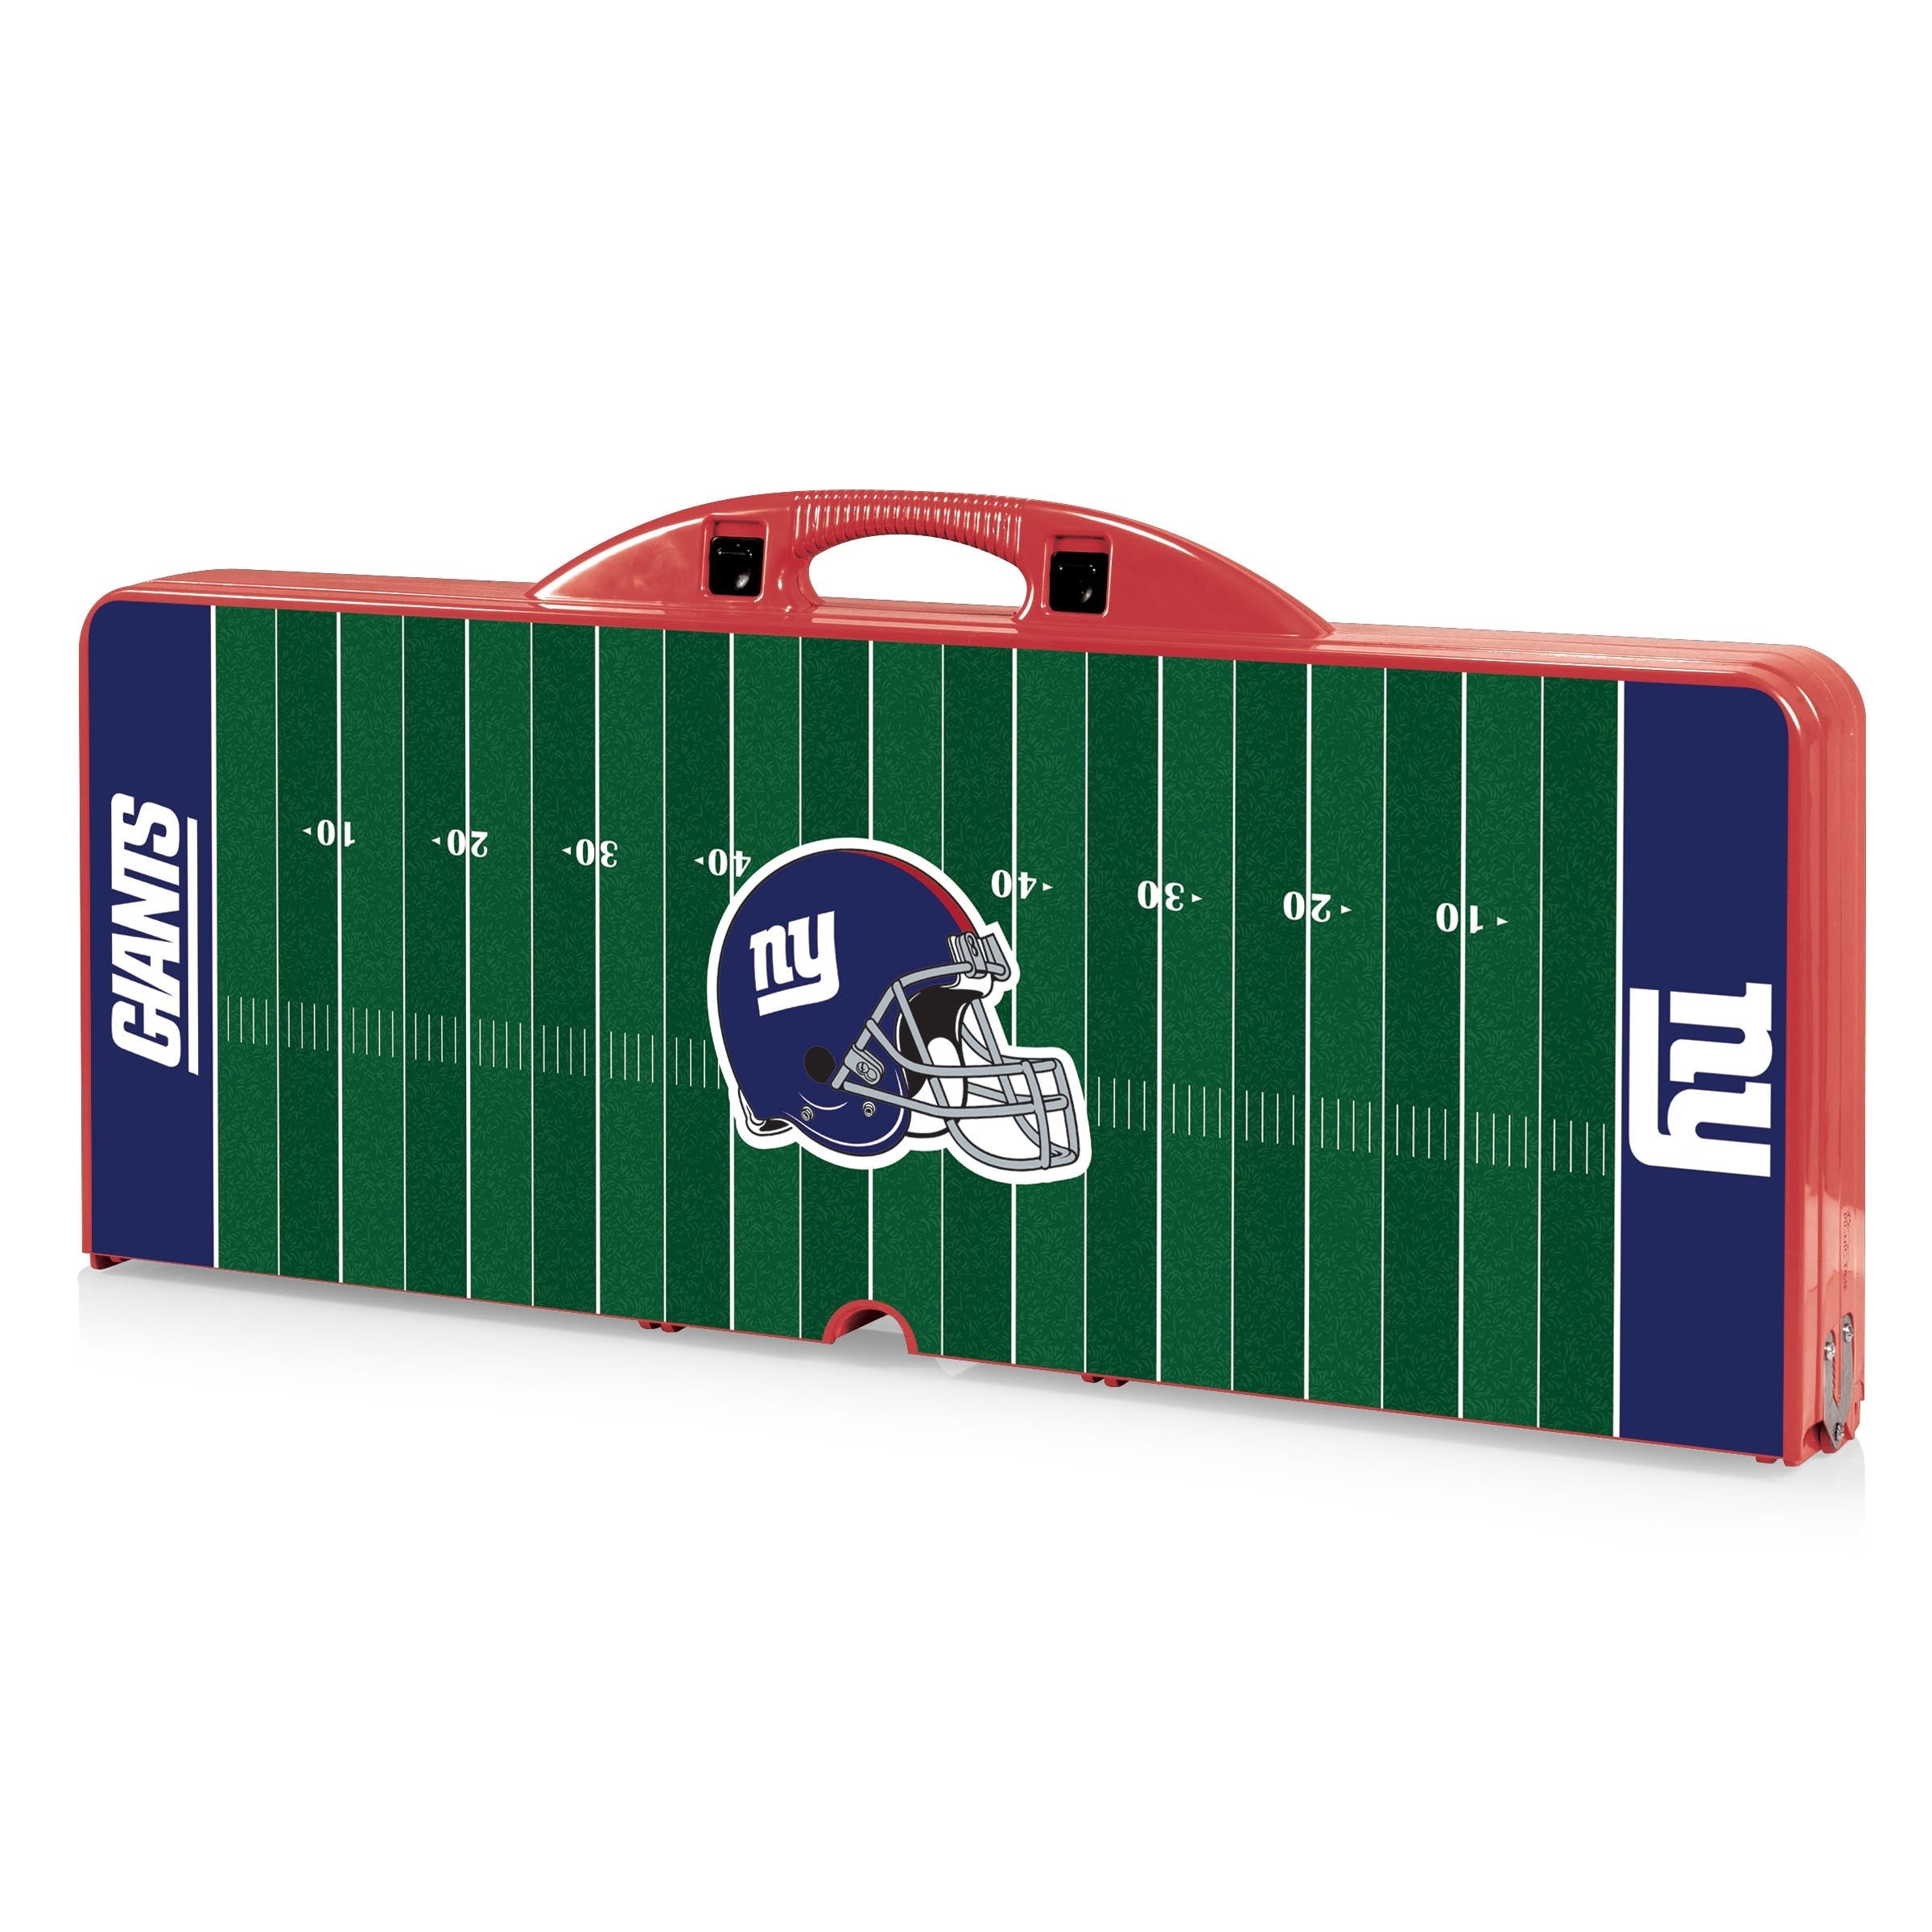 Football Field - New York Giants - Picnic Table Portable Folding Table with Seats